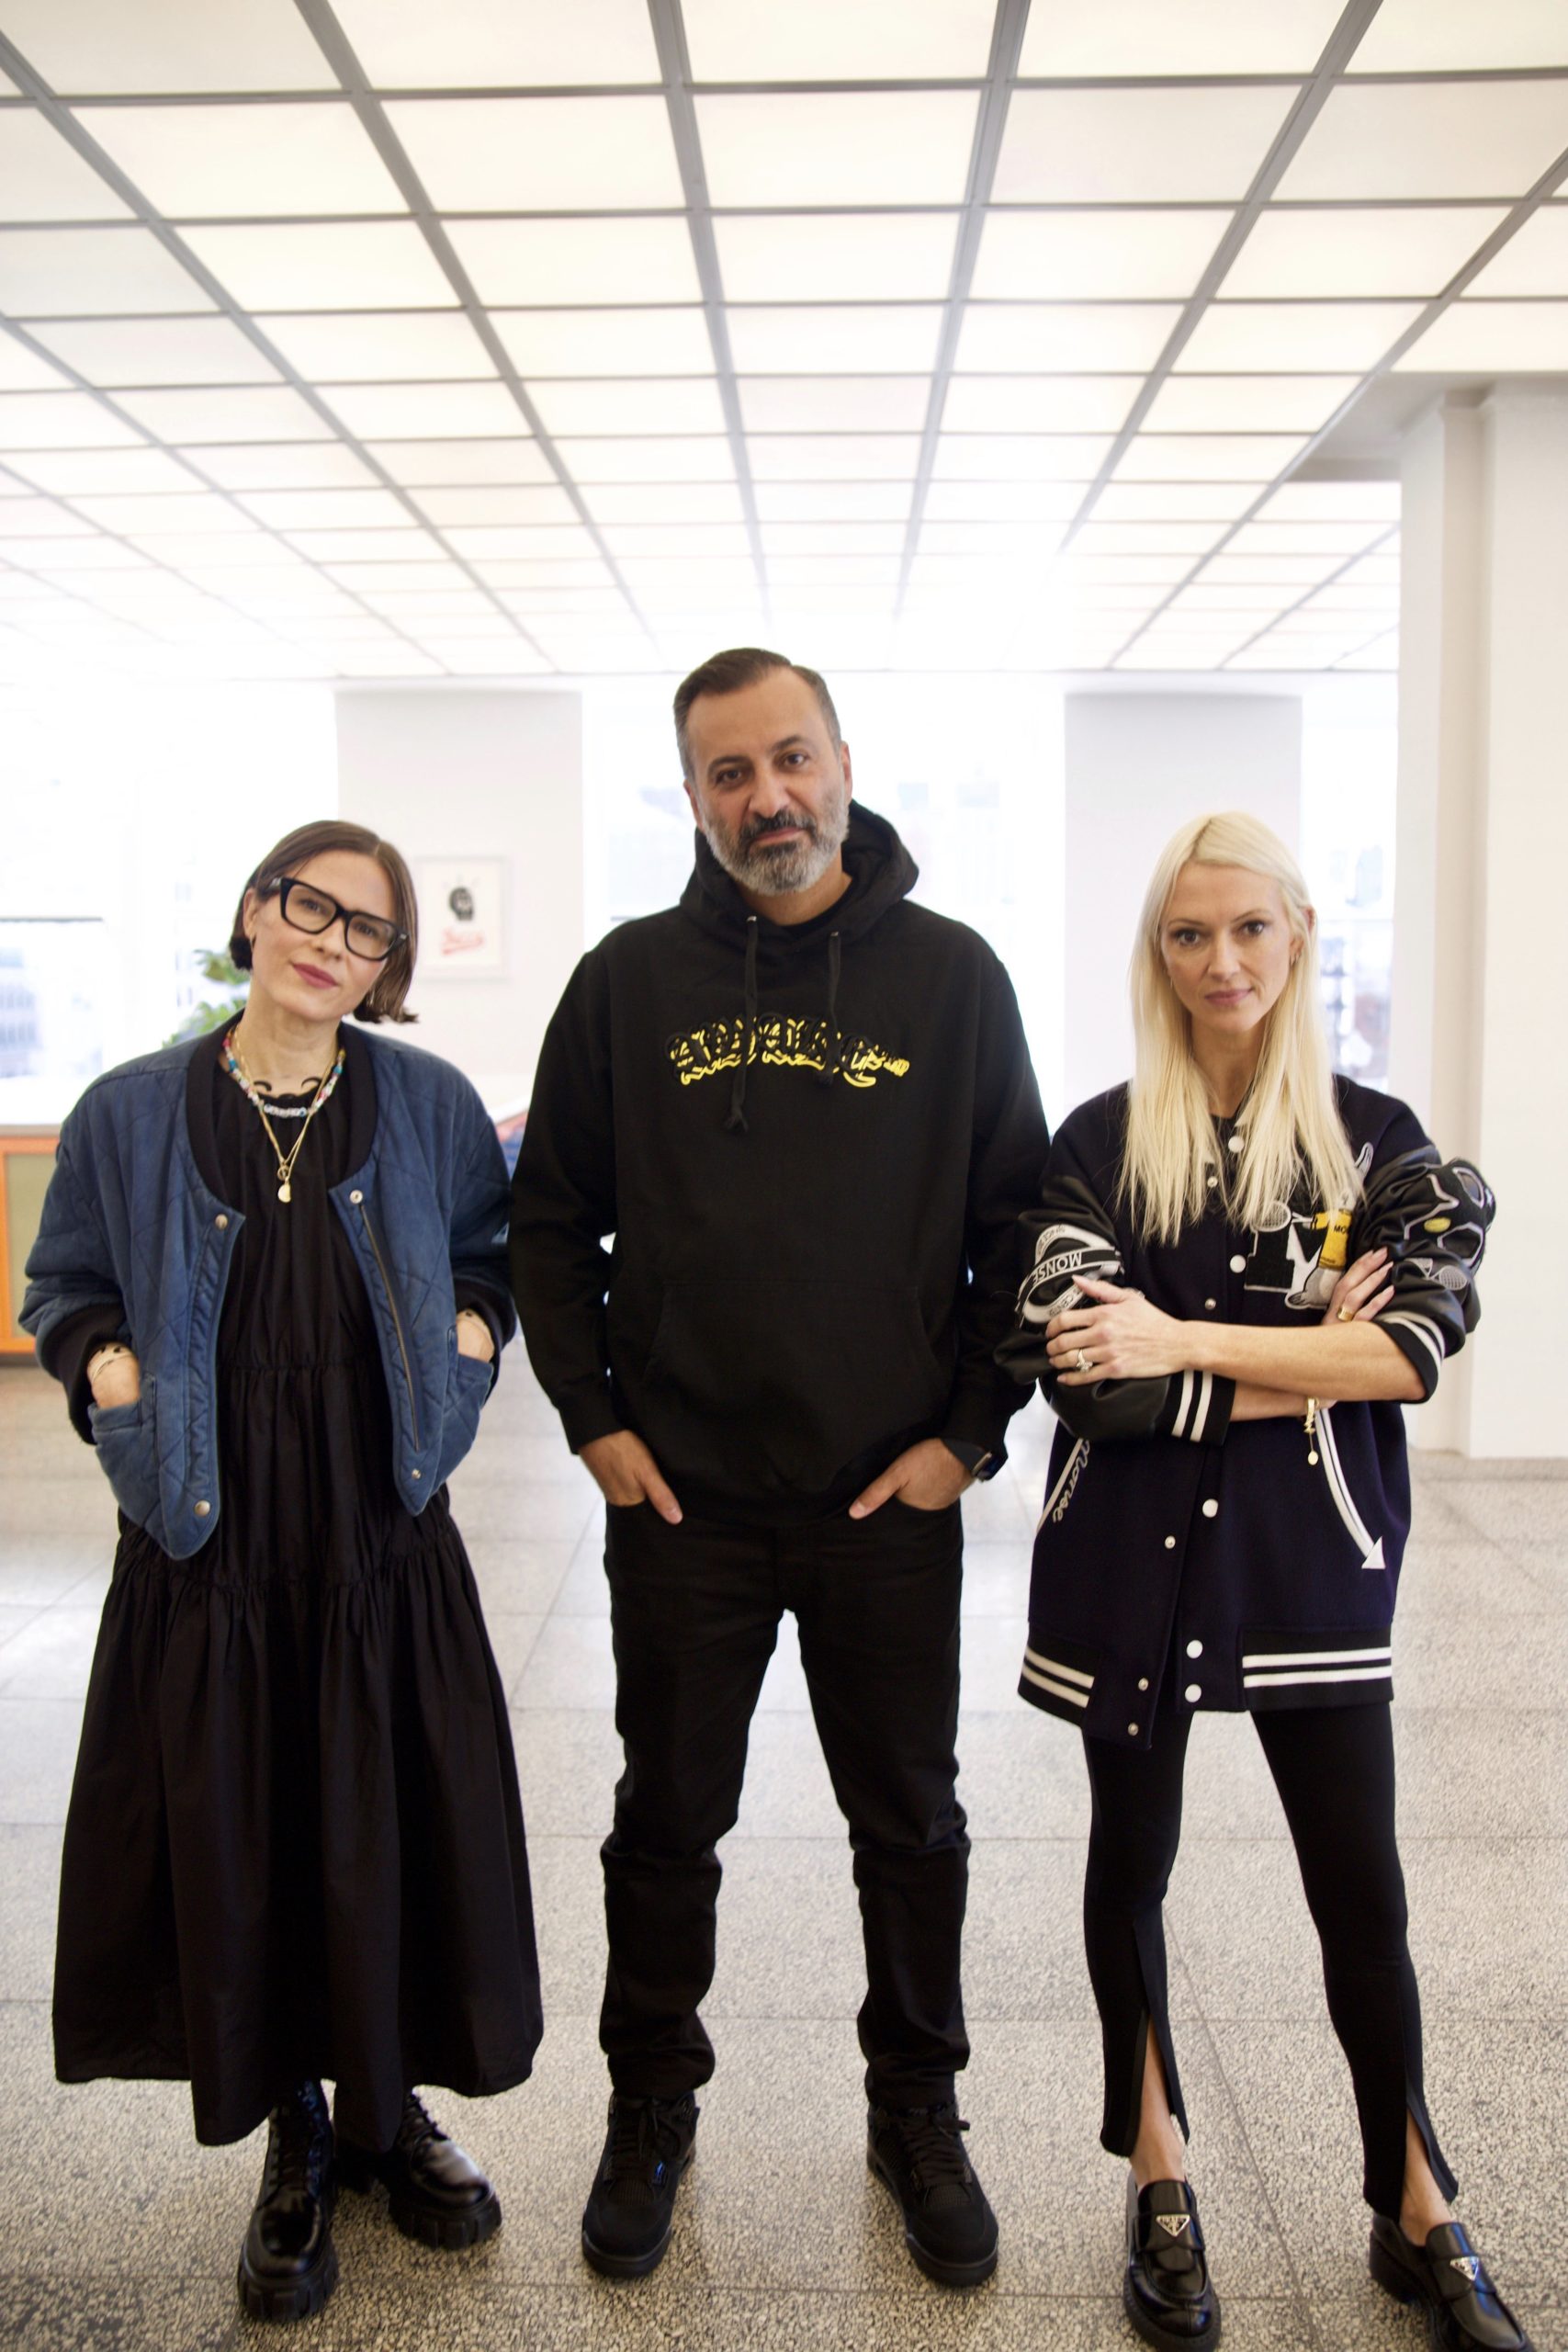  Georgie Greville, Mazdack Rassi and Zanna Roberts Rassi photographed at the Milk office.